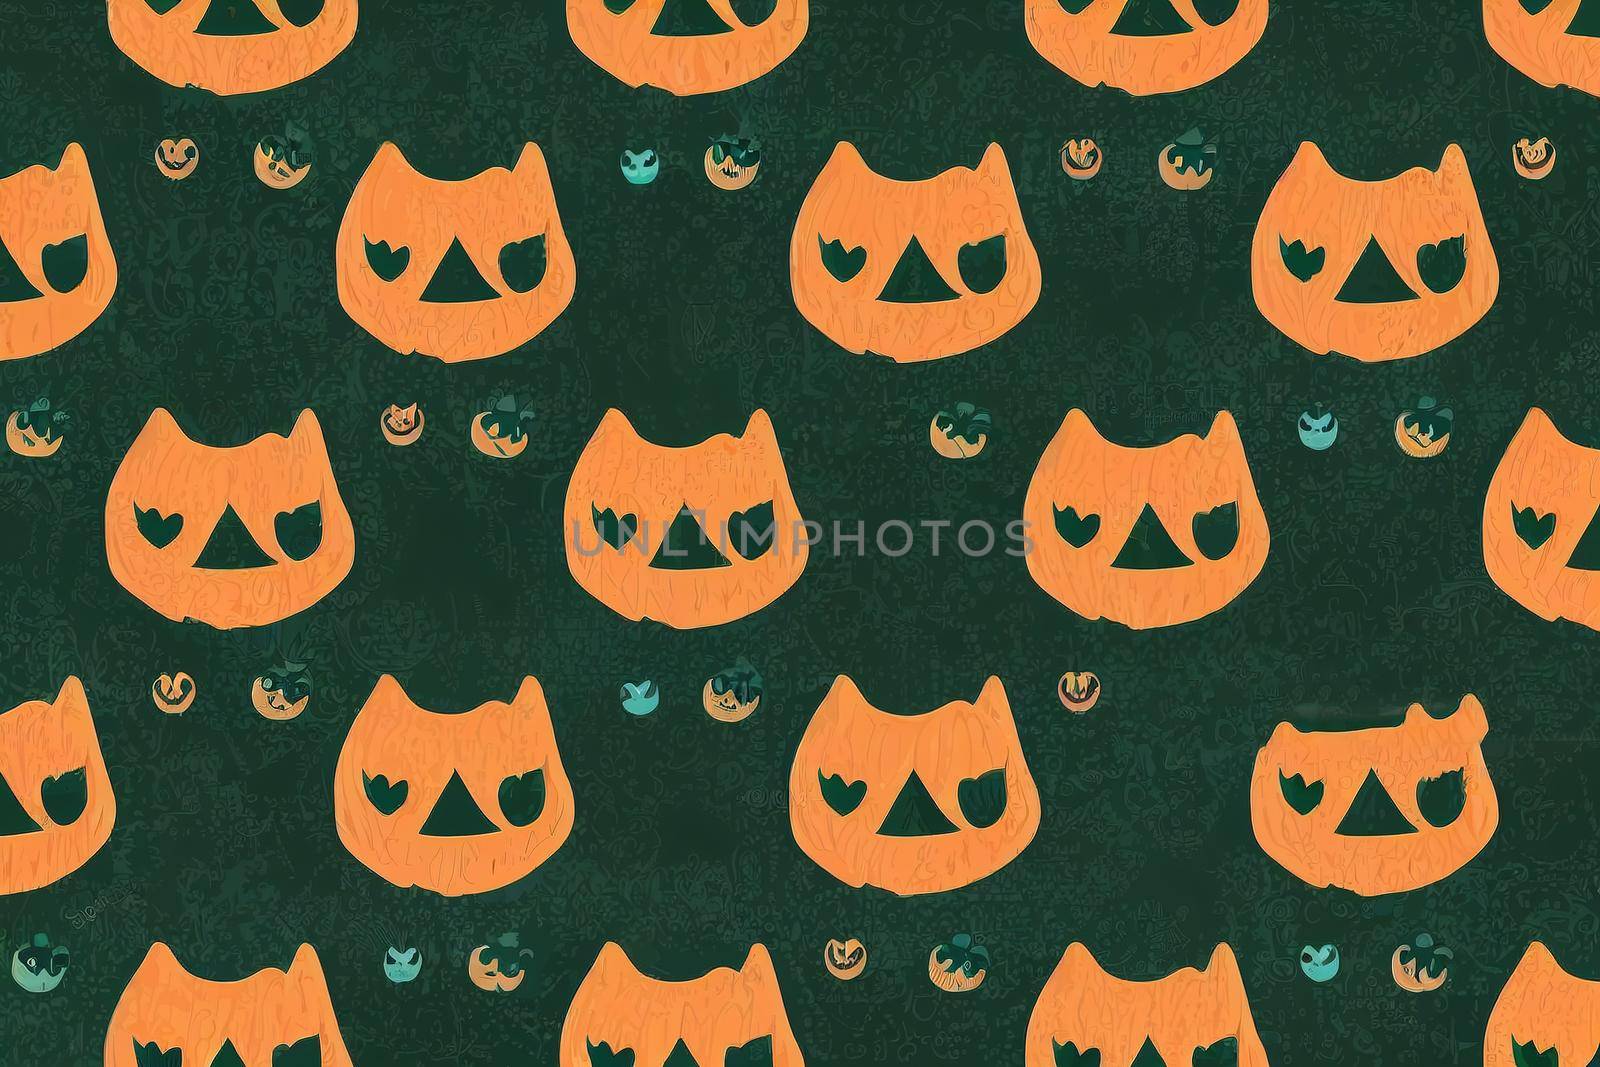 Cute seamless pattern of Halloween cat,pumpkin,skull,heart shapes on green,happy Halloween concept illustration,design for texture,fabric,clothing,decoration,wrapping,print,cartoon character v3